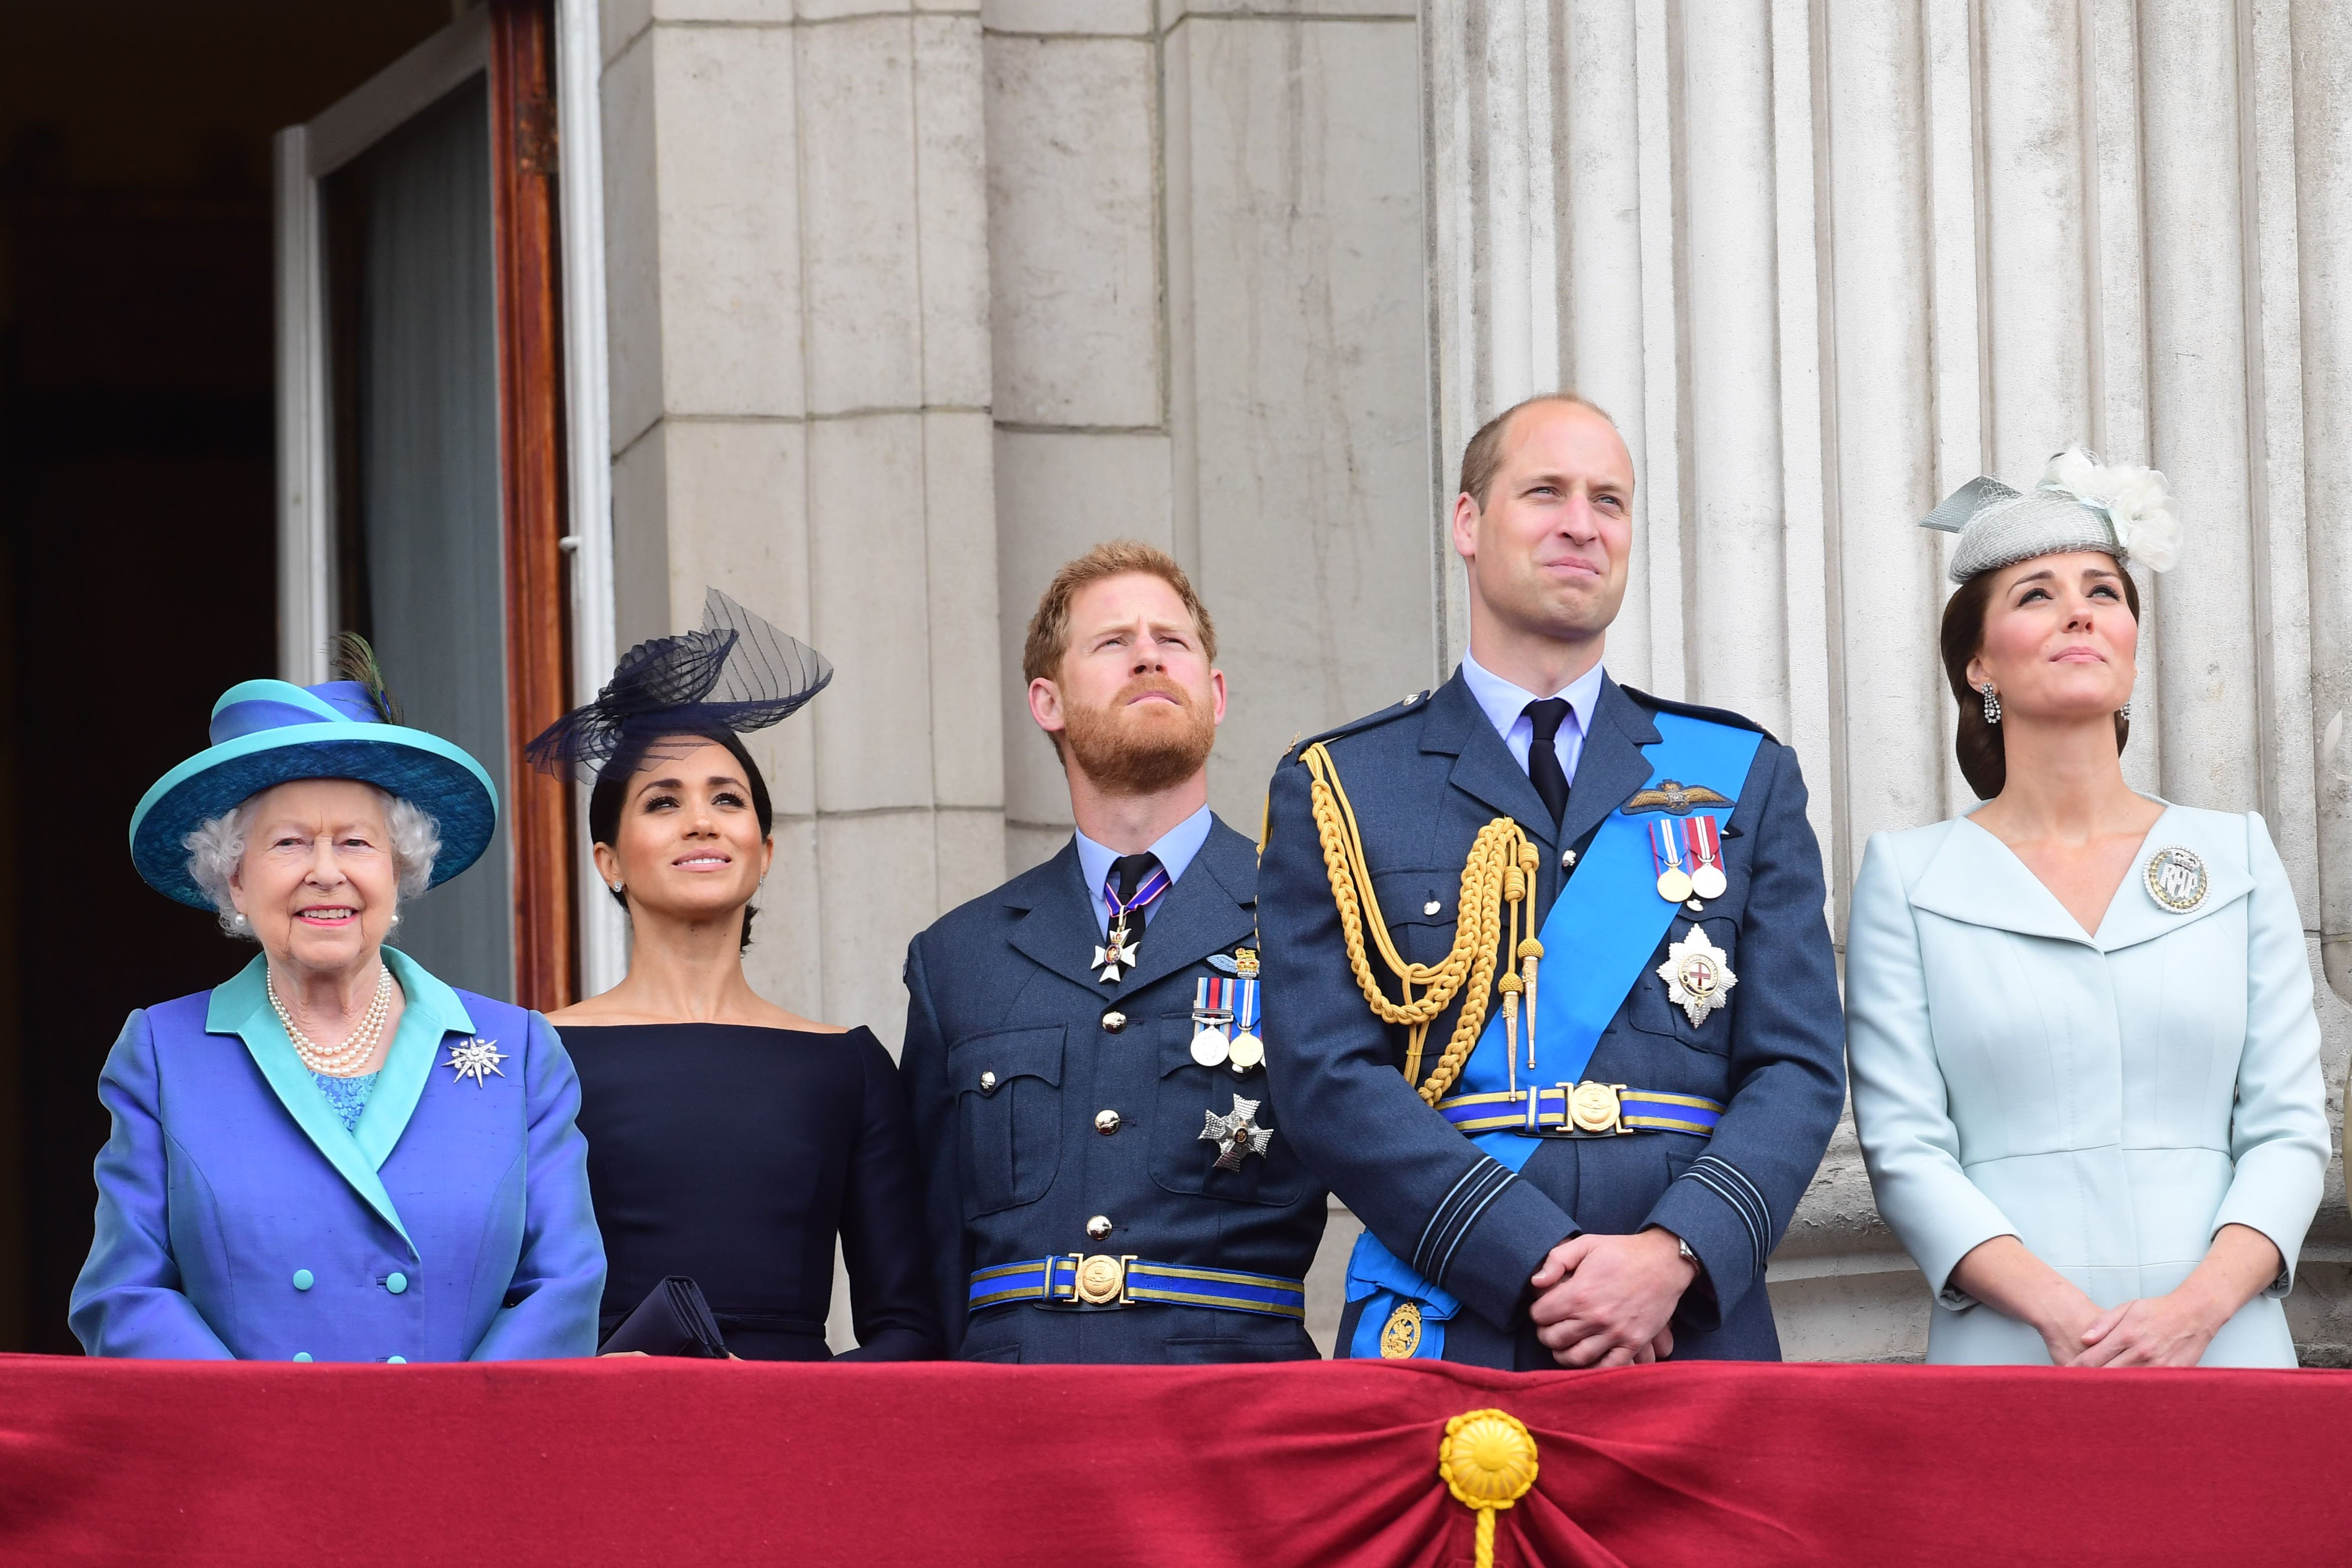 Queen Elizabeth II, Duchess Meghan, Prince Harry, Prince William, and Duchess Kate watch the RAF 100th anniversary flypast from the balcony of Buckingham Palace on July 10, 2018, in London, England. | Source: Paul Grover - WPA Pool/Getty Images